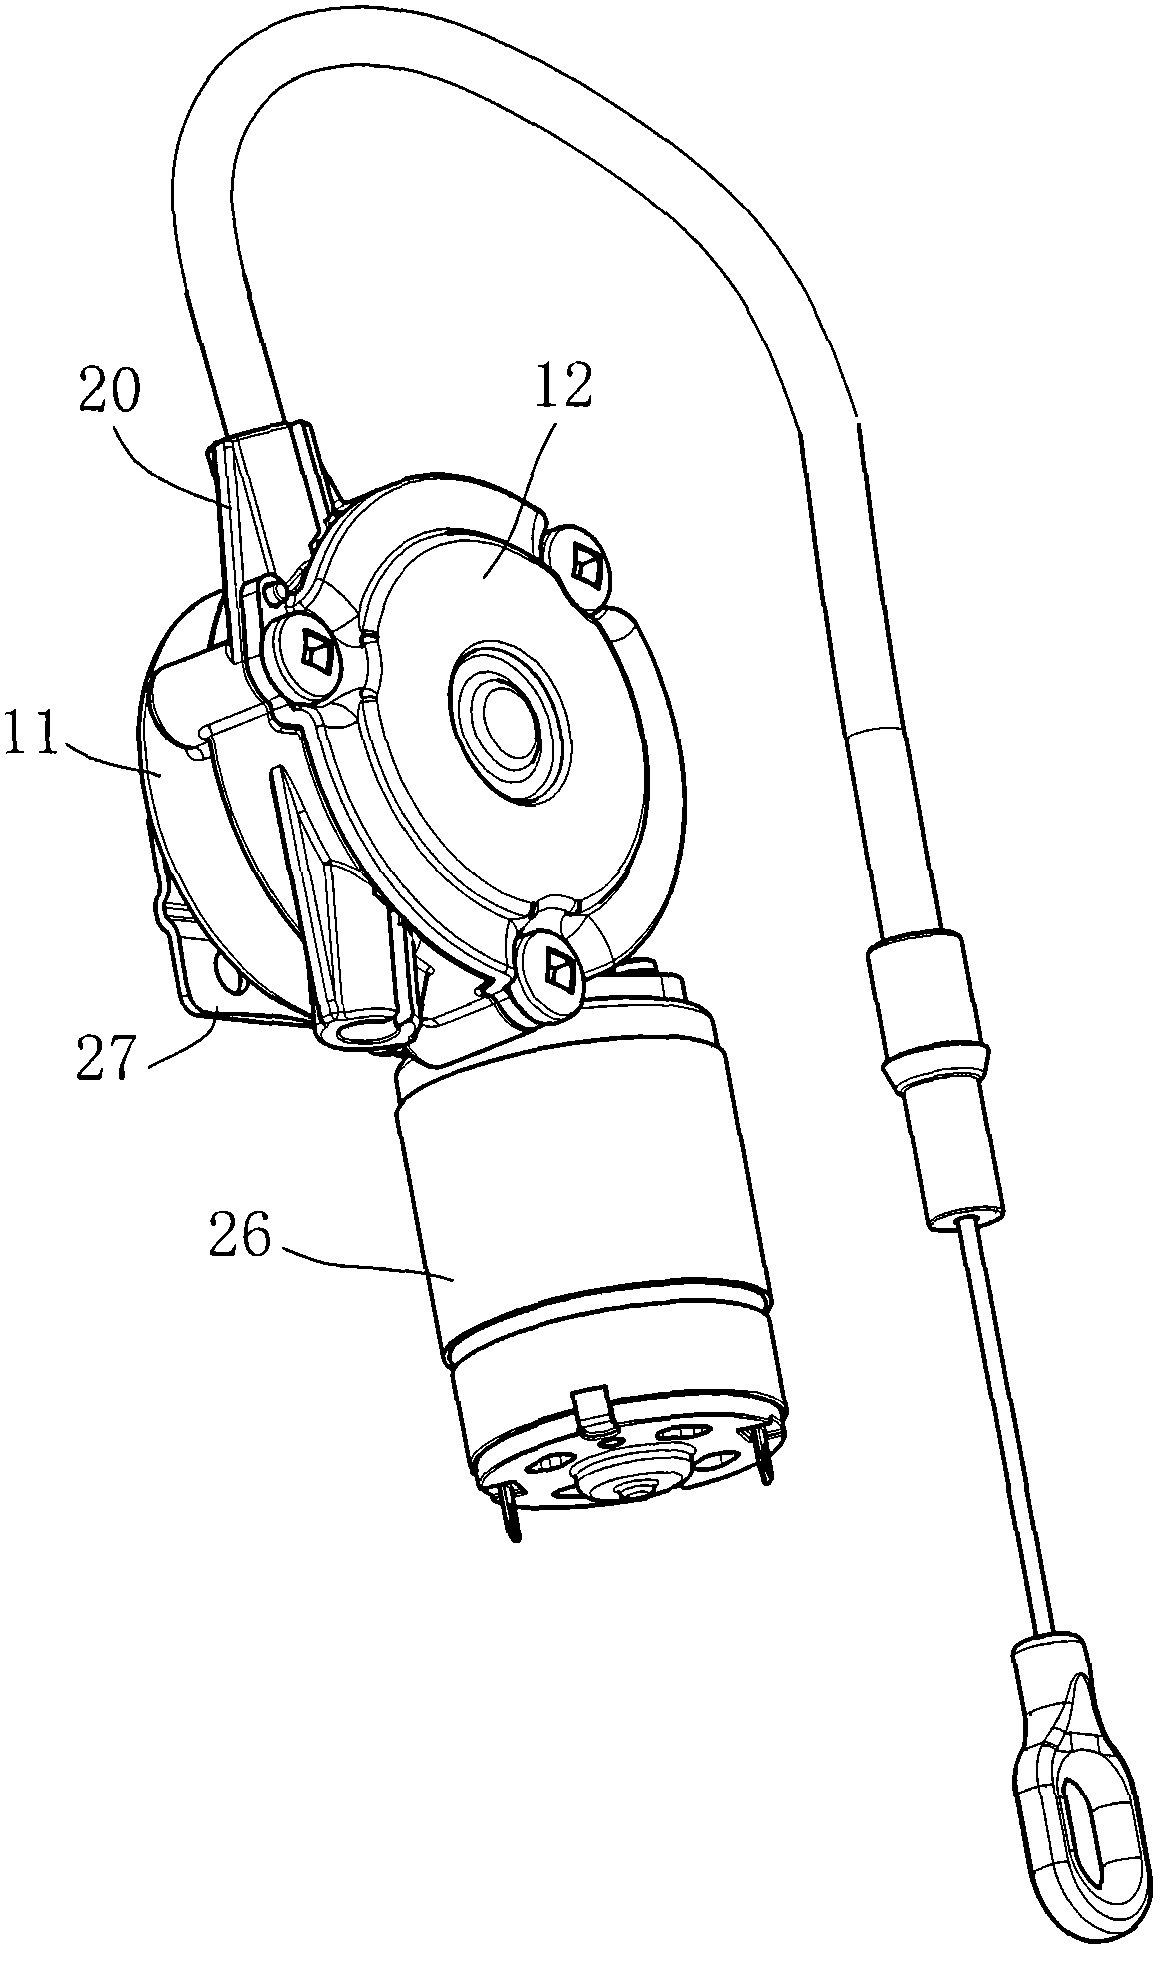 Driving device for electric lumbar system